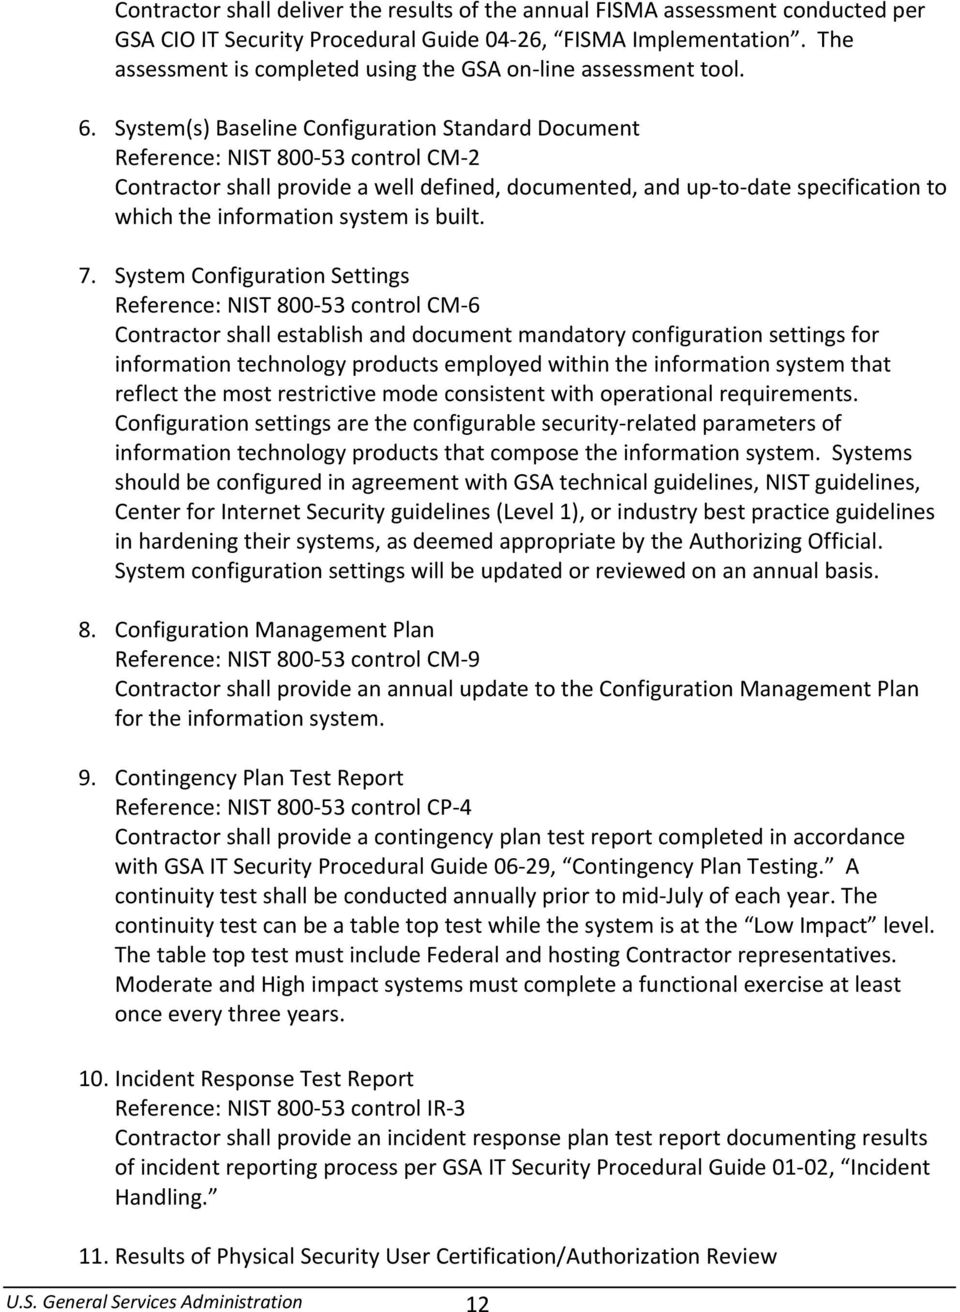 System(s) Baseline Configuration Standard Document Reference: NIST 800 53 control CM 2 Contractor shall provide a well defined, documented, and up to date specification to which the information